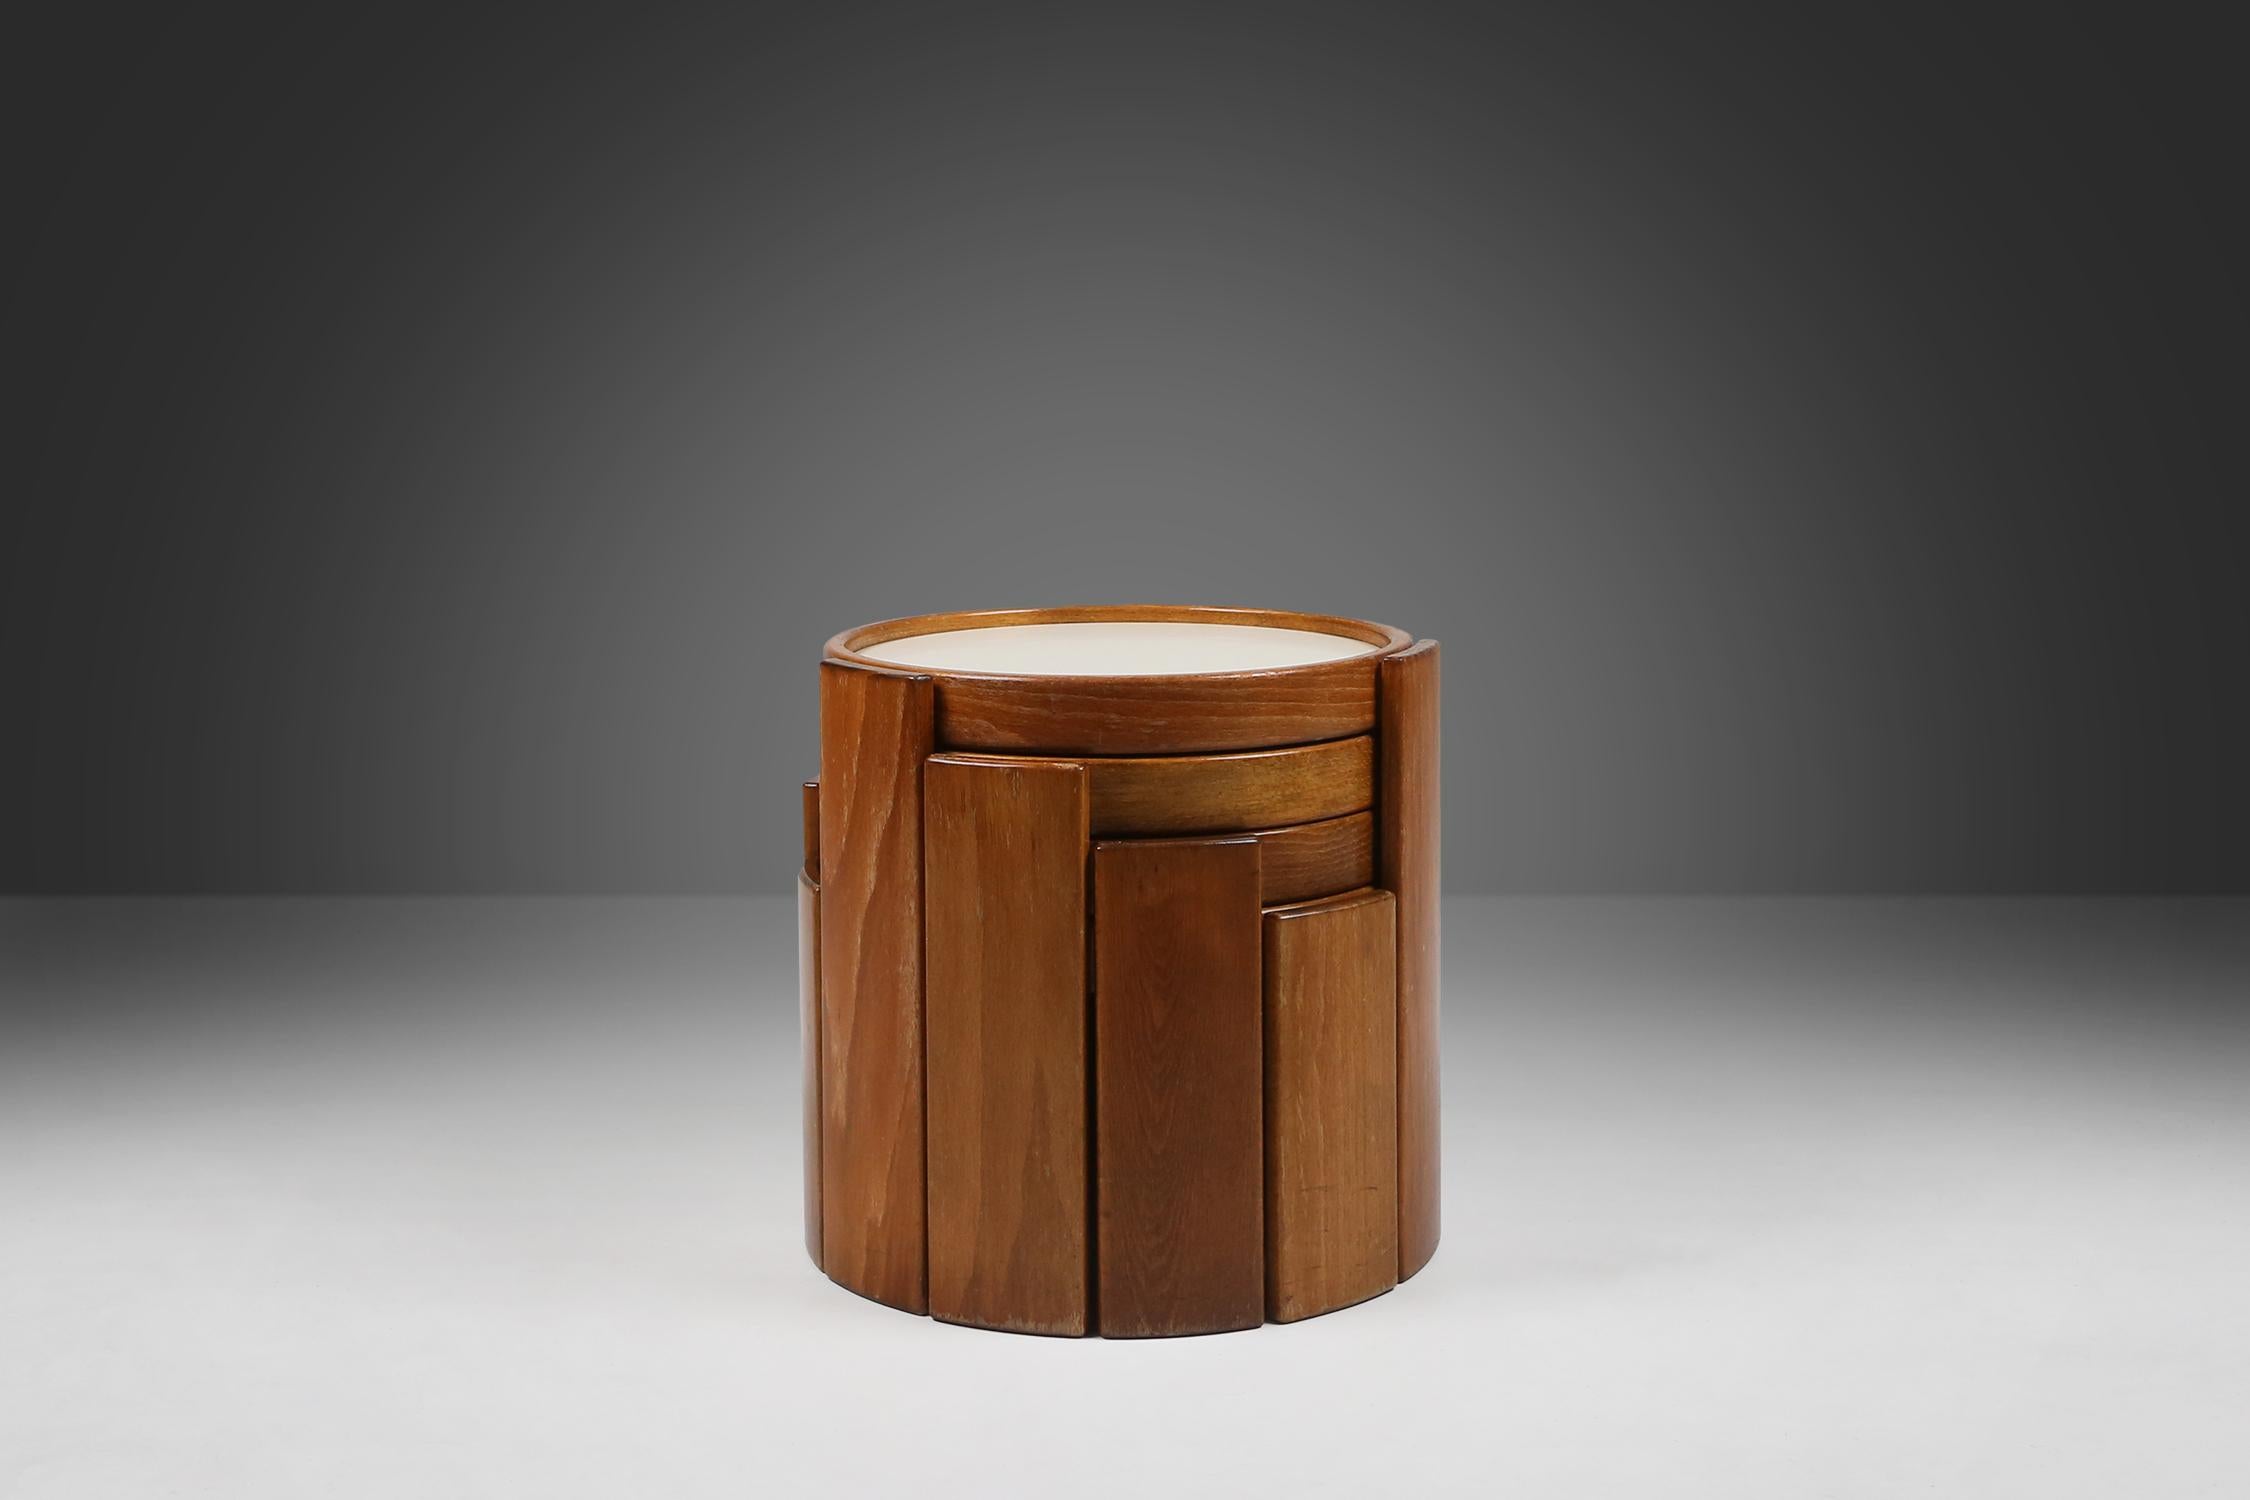 Gianfranco Frattini for Casina, Italy, 1966, early edition wooden nesting tables For Sale 1